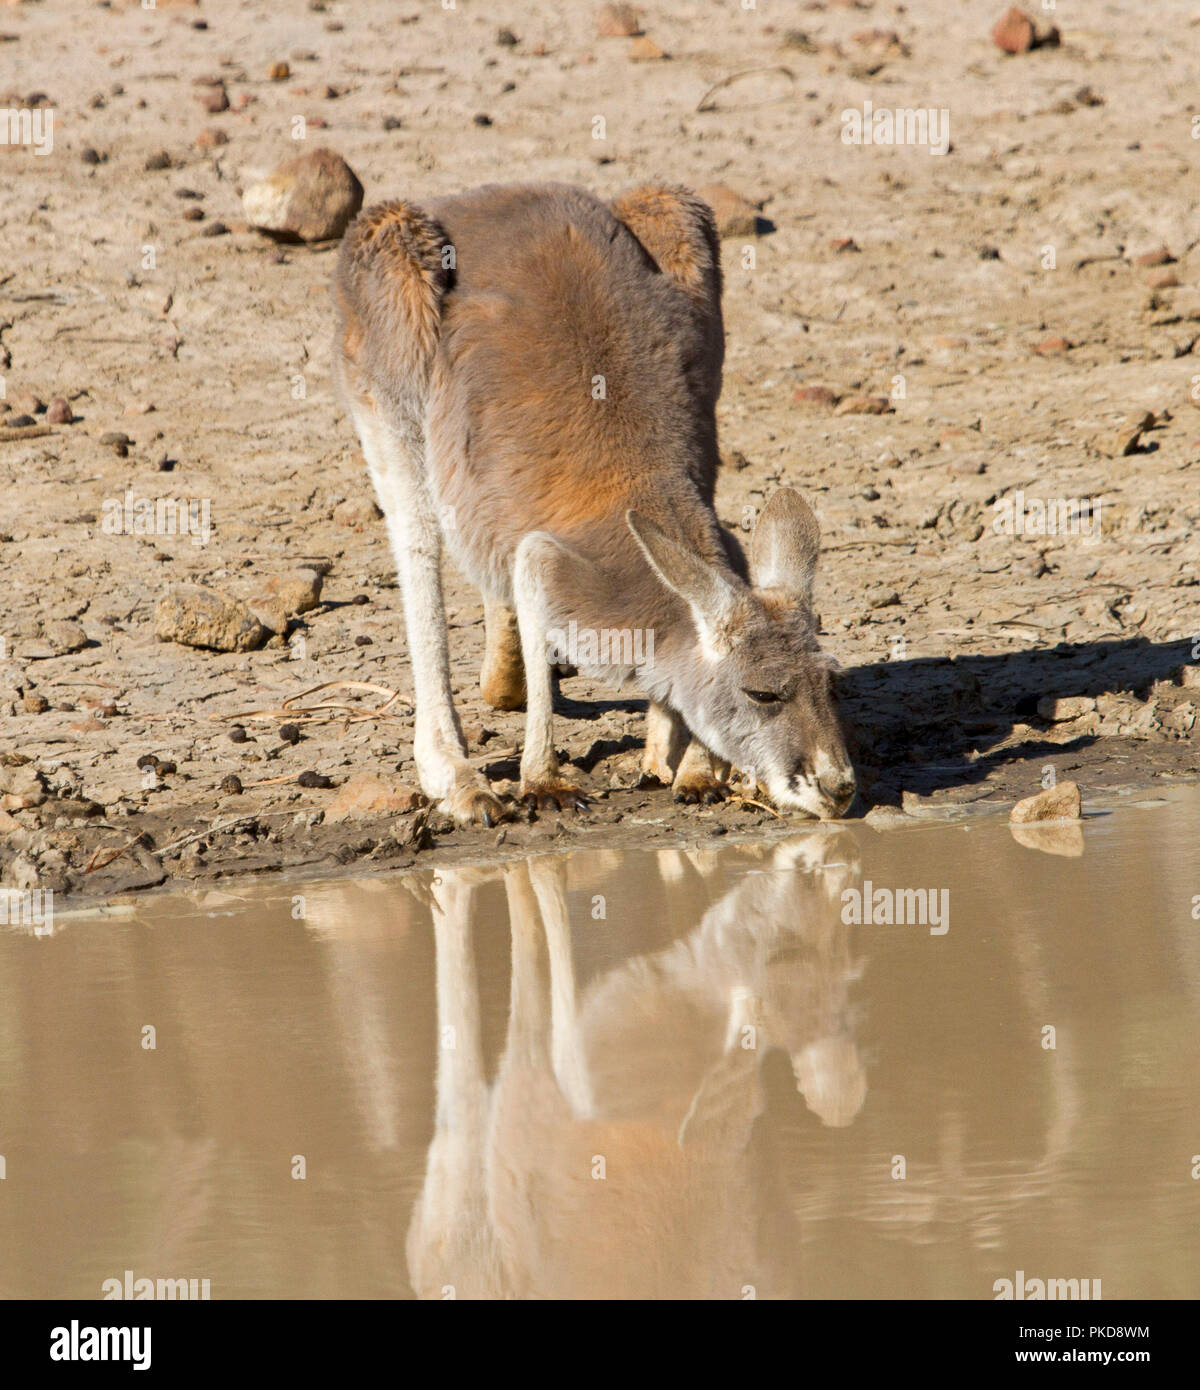 Red kangaroo, Macropus rufus, drinking & reflected in calm water of creek during drought in outback Australia Stock Photo